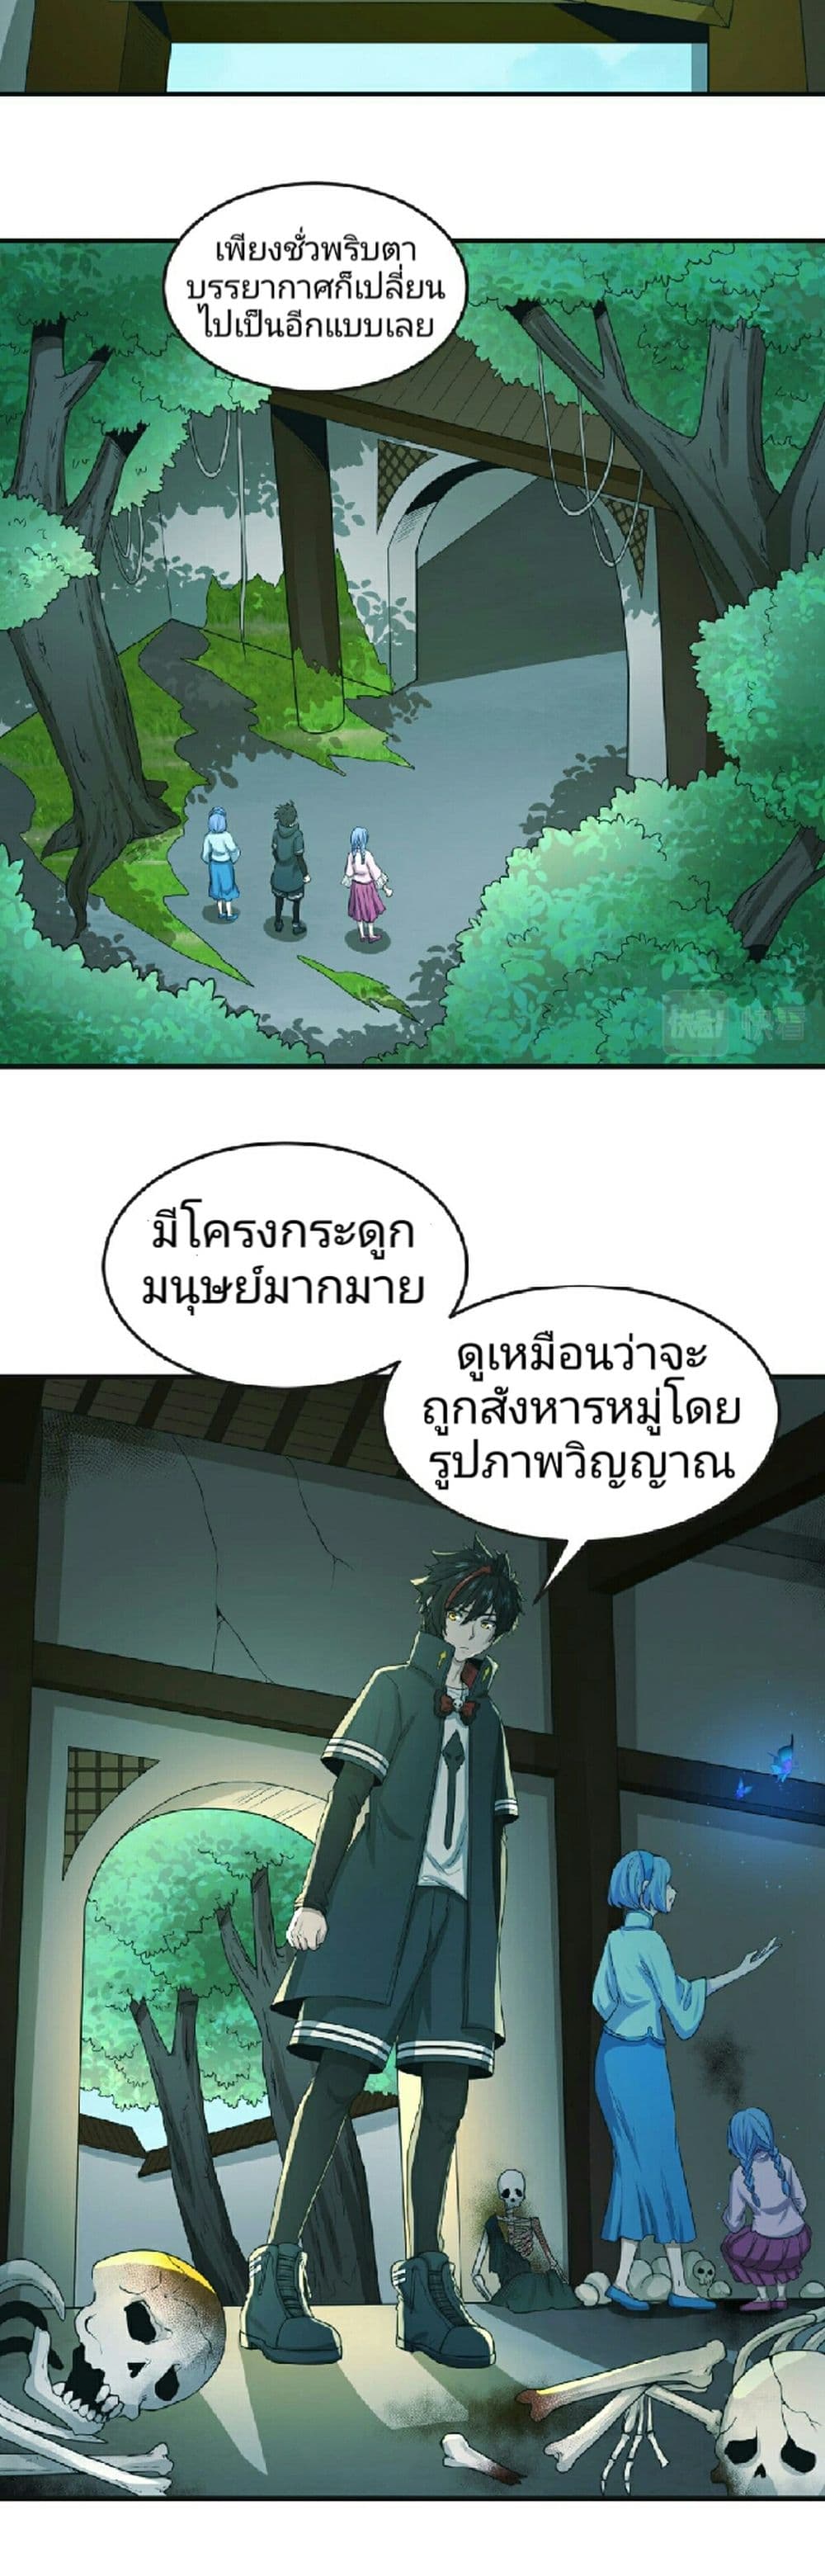 The Age of Ghost Spirits à¸à¸­à¸à¸à¸µà¹ 49 (37)